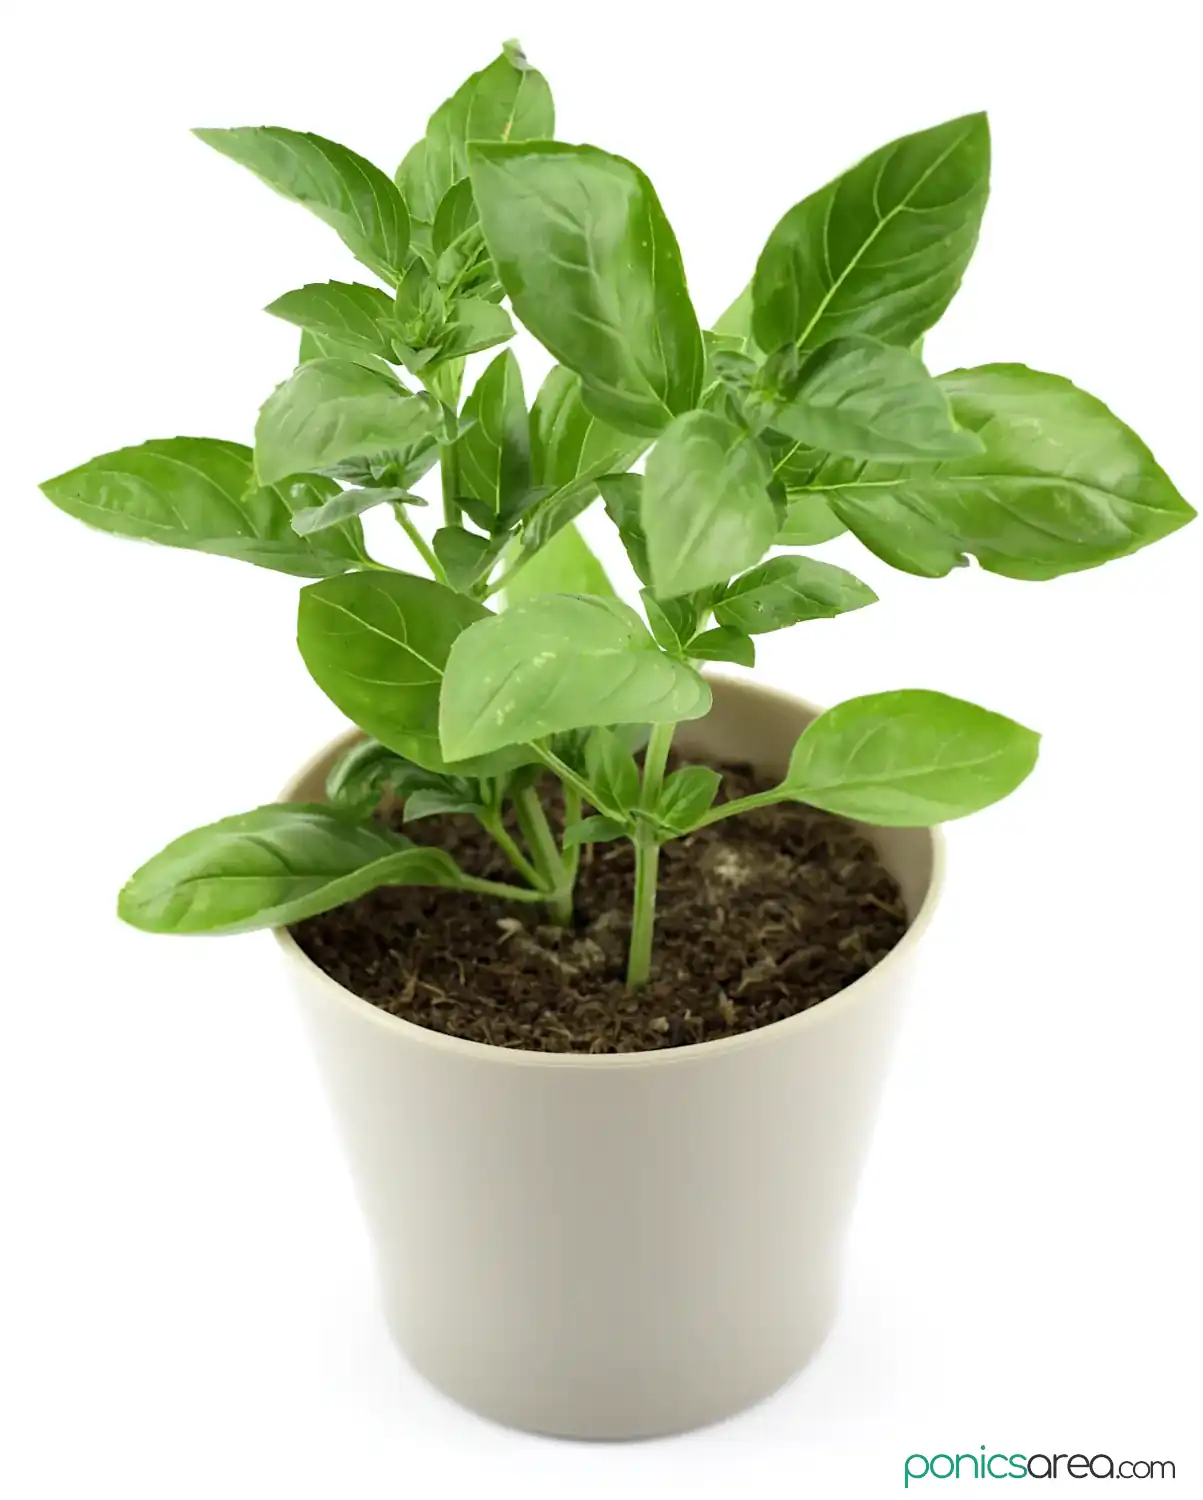 revive wilted basil plant